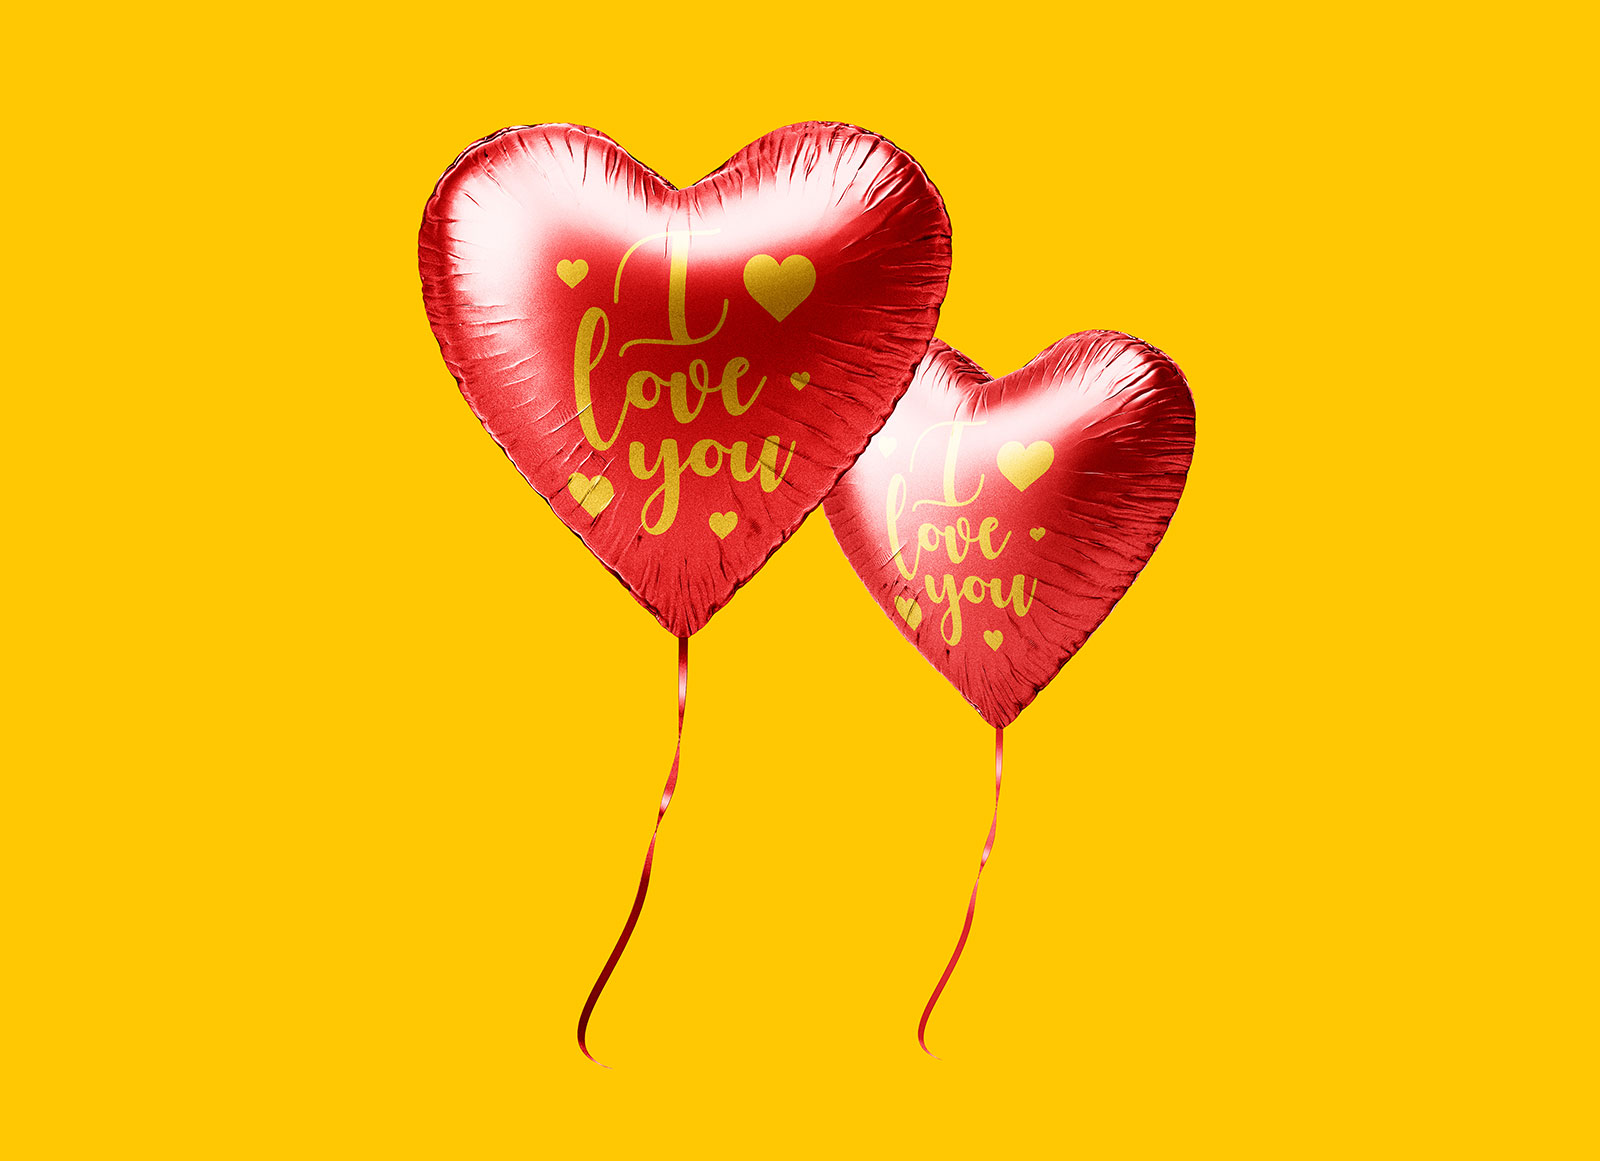 Free Heart Balloon Mockup PSD Set For Valentine's Day 2020 - Good